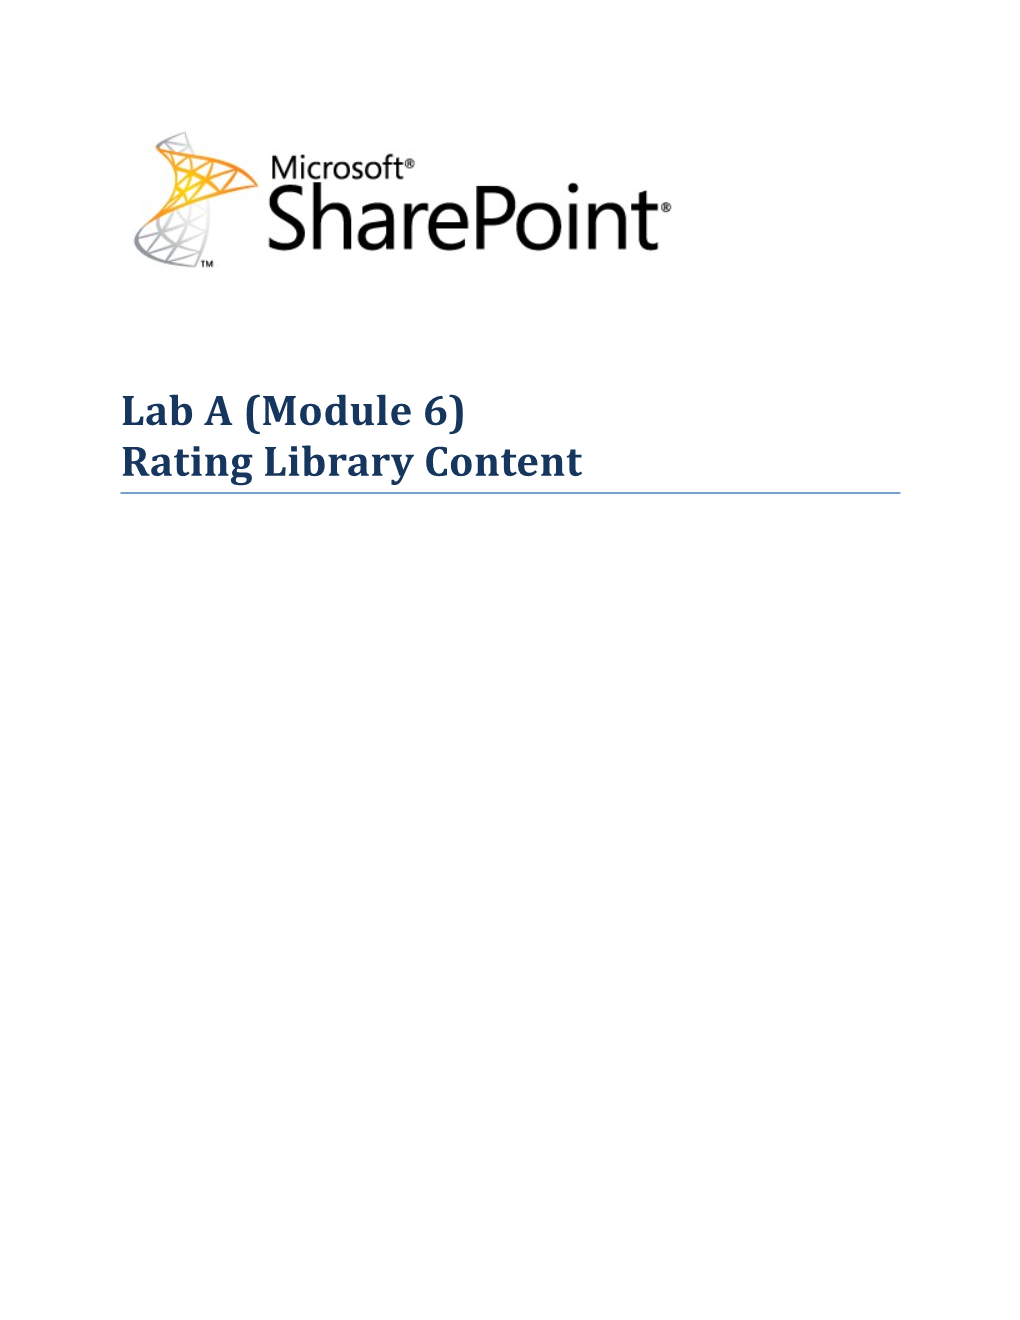 Lab a (Module 6) Rating Library Content